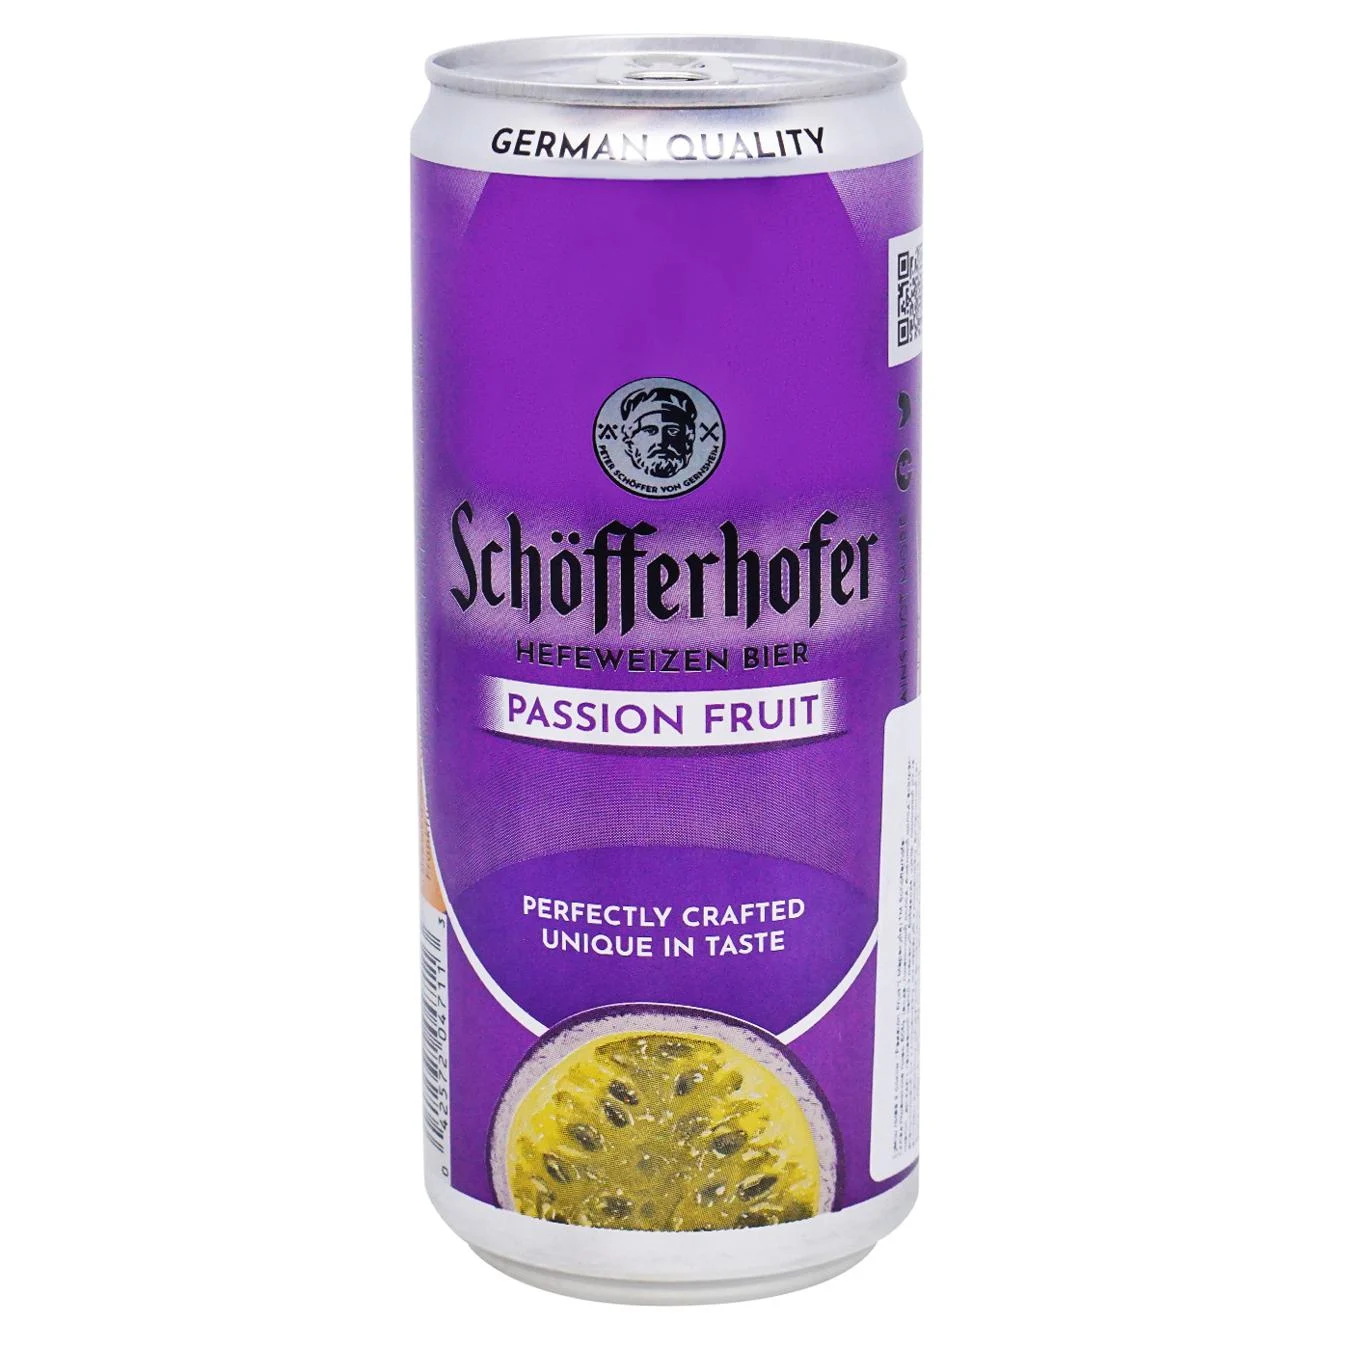 Schofferhofer light beer with a taste of passion fruit 2.5% 0.33 l iron can